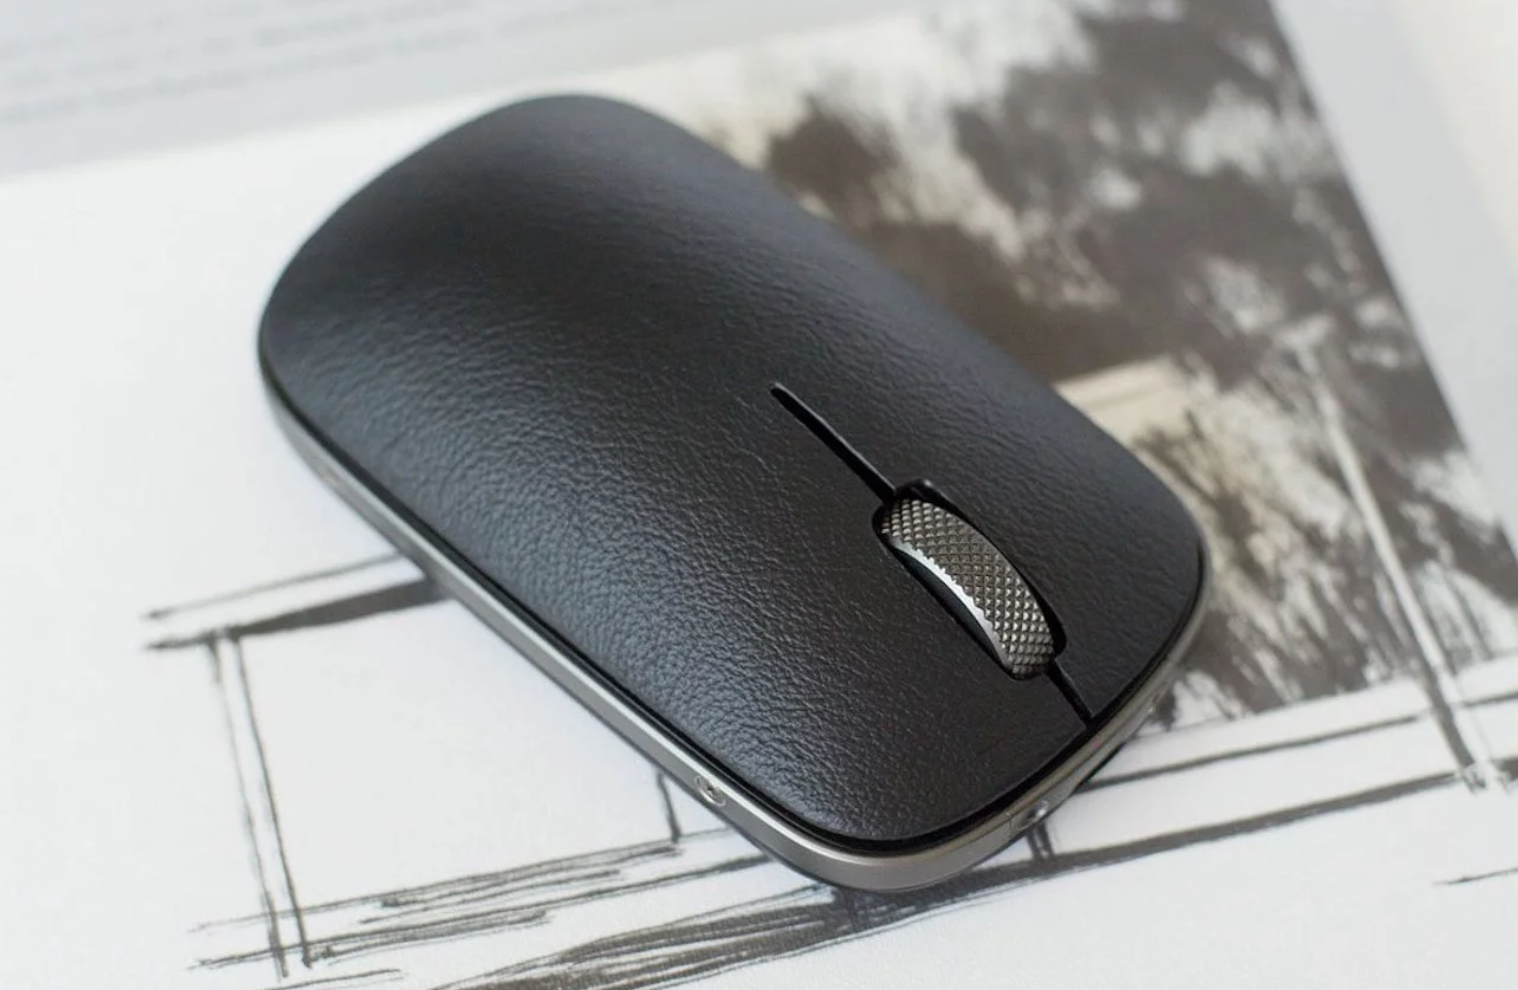 theGadgetFlow: AZIO Retro Classic Mouse works on almost any surface